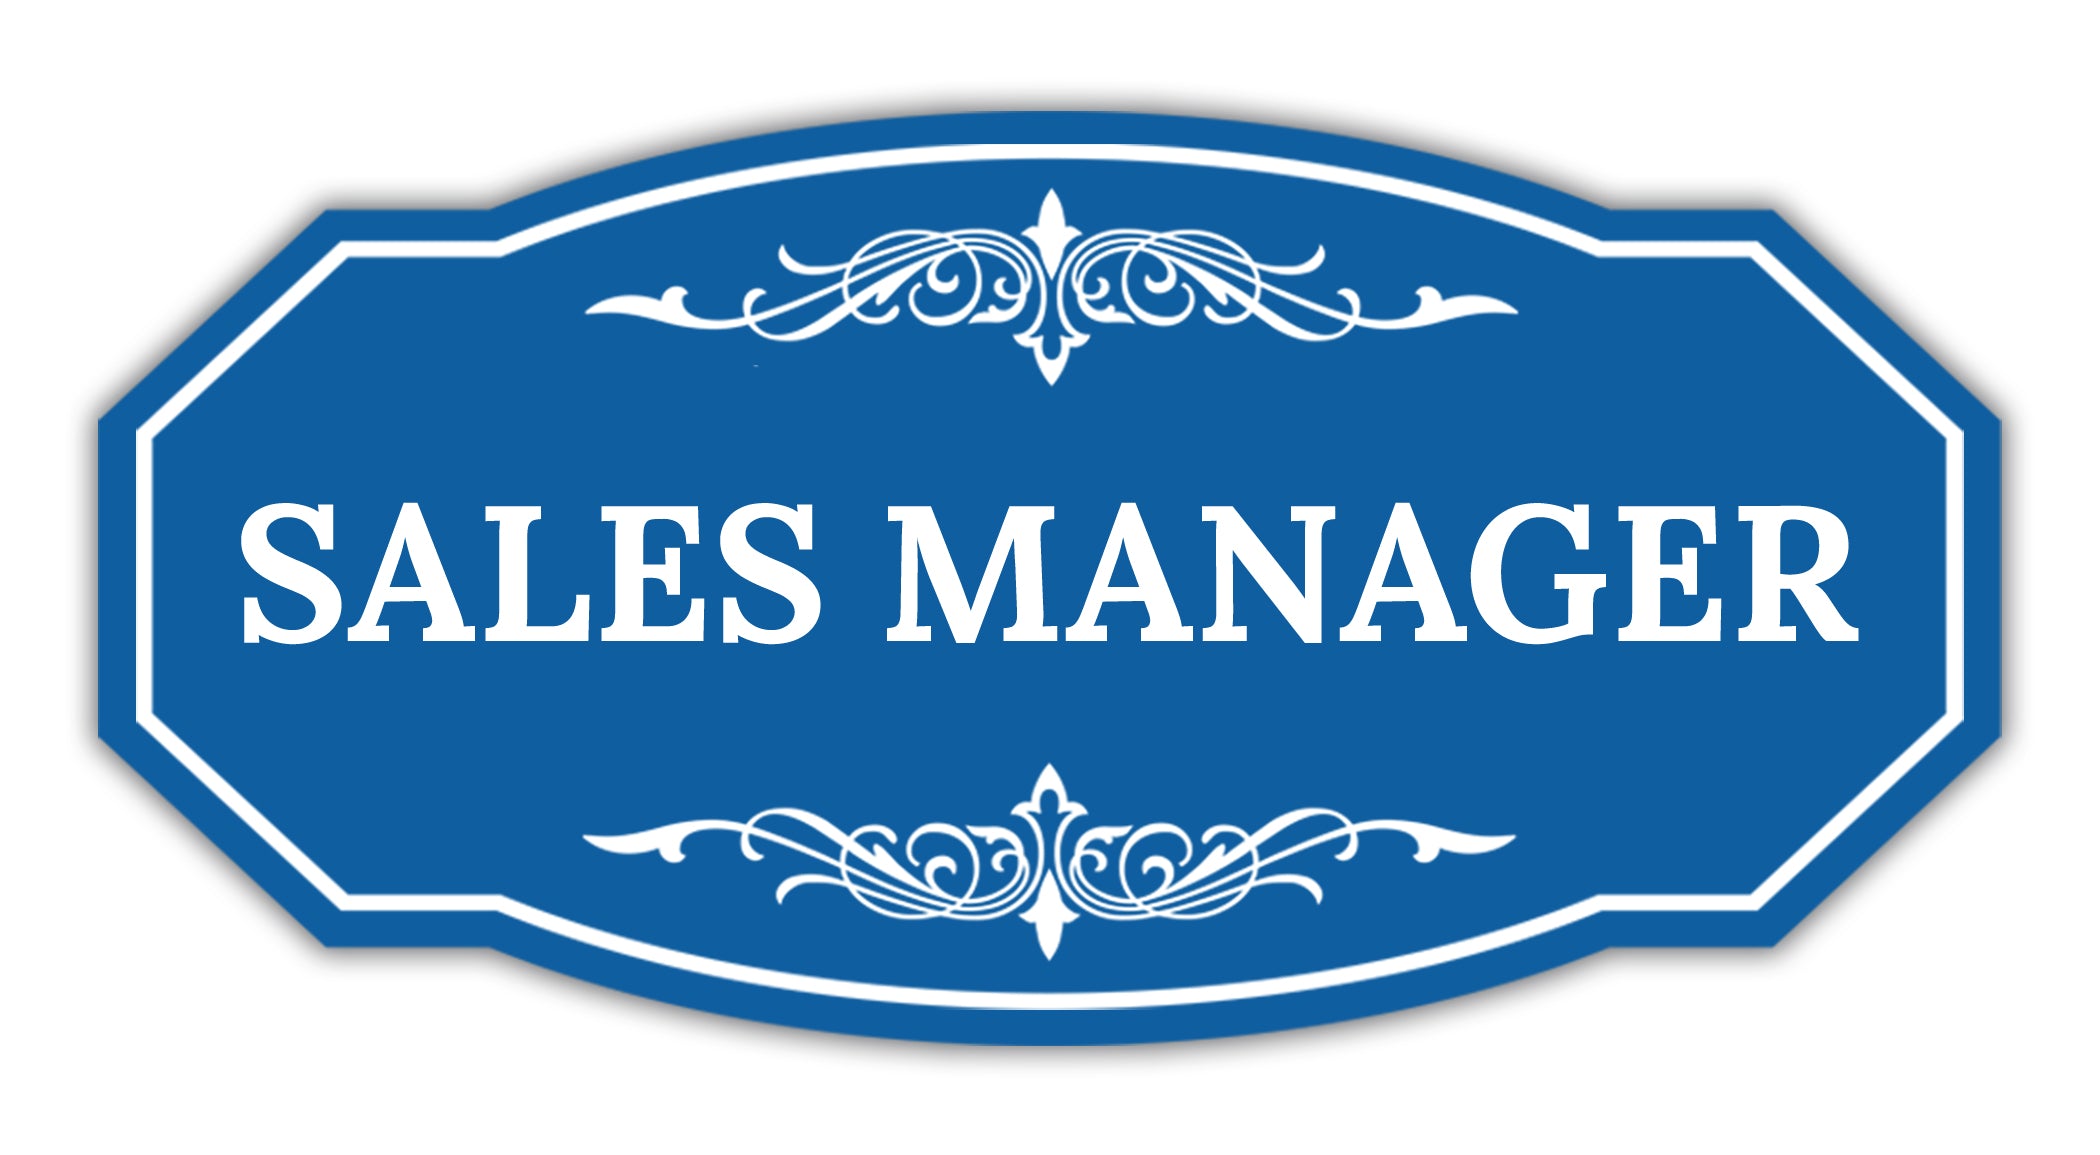 Signs ByLITA Victorian Sales Manager Graphic Wall or Door Sign